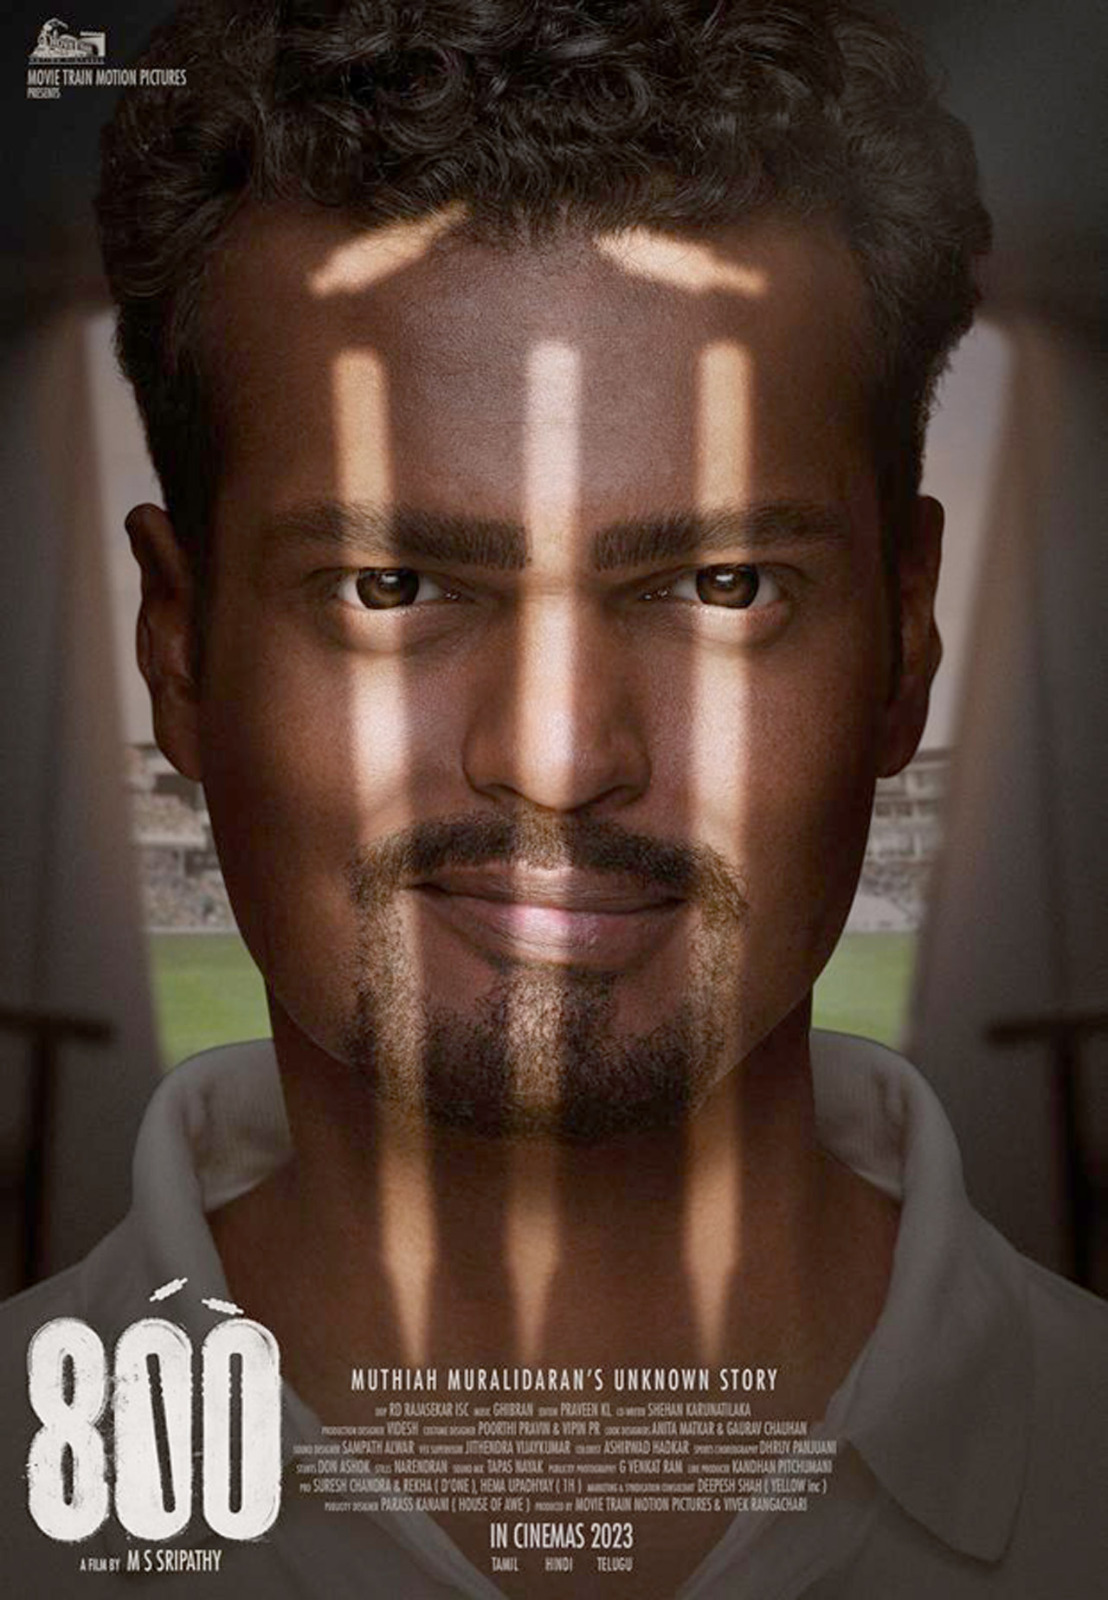 Madhurr Mittal to play cricket legend Muthiah Mularidaran in upcoming biopic 800, see first look